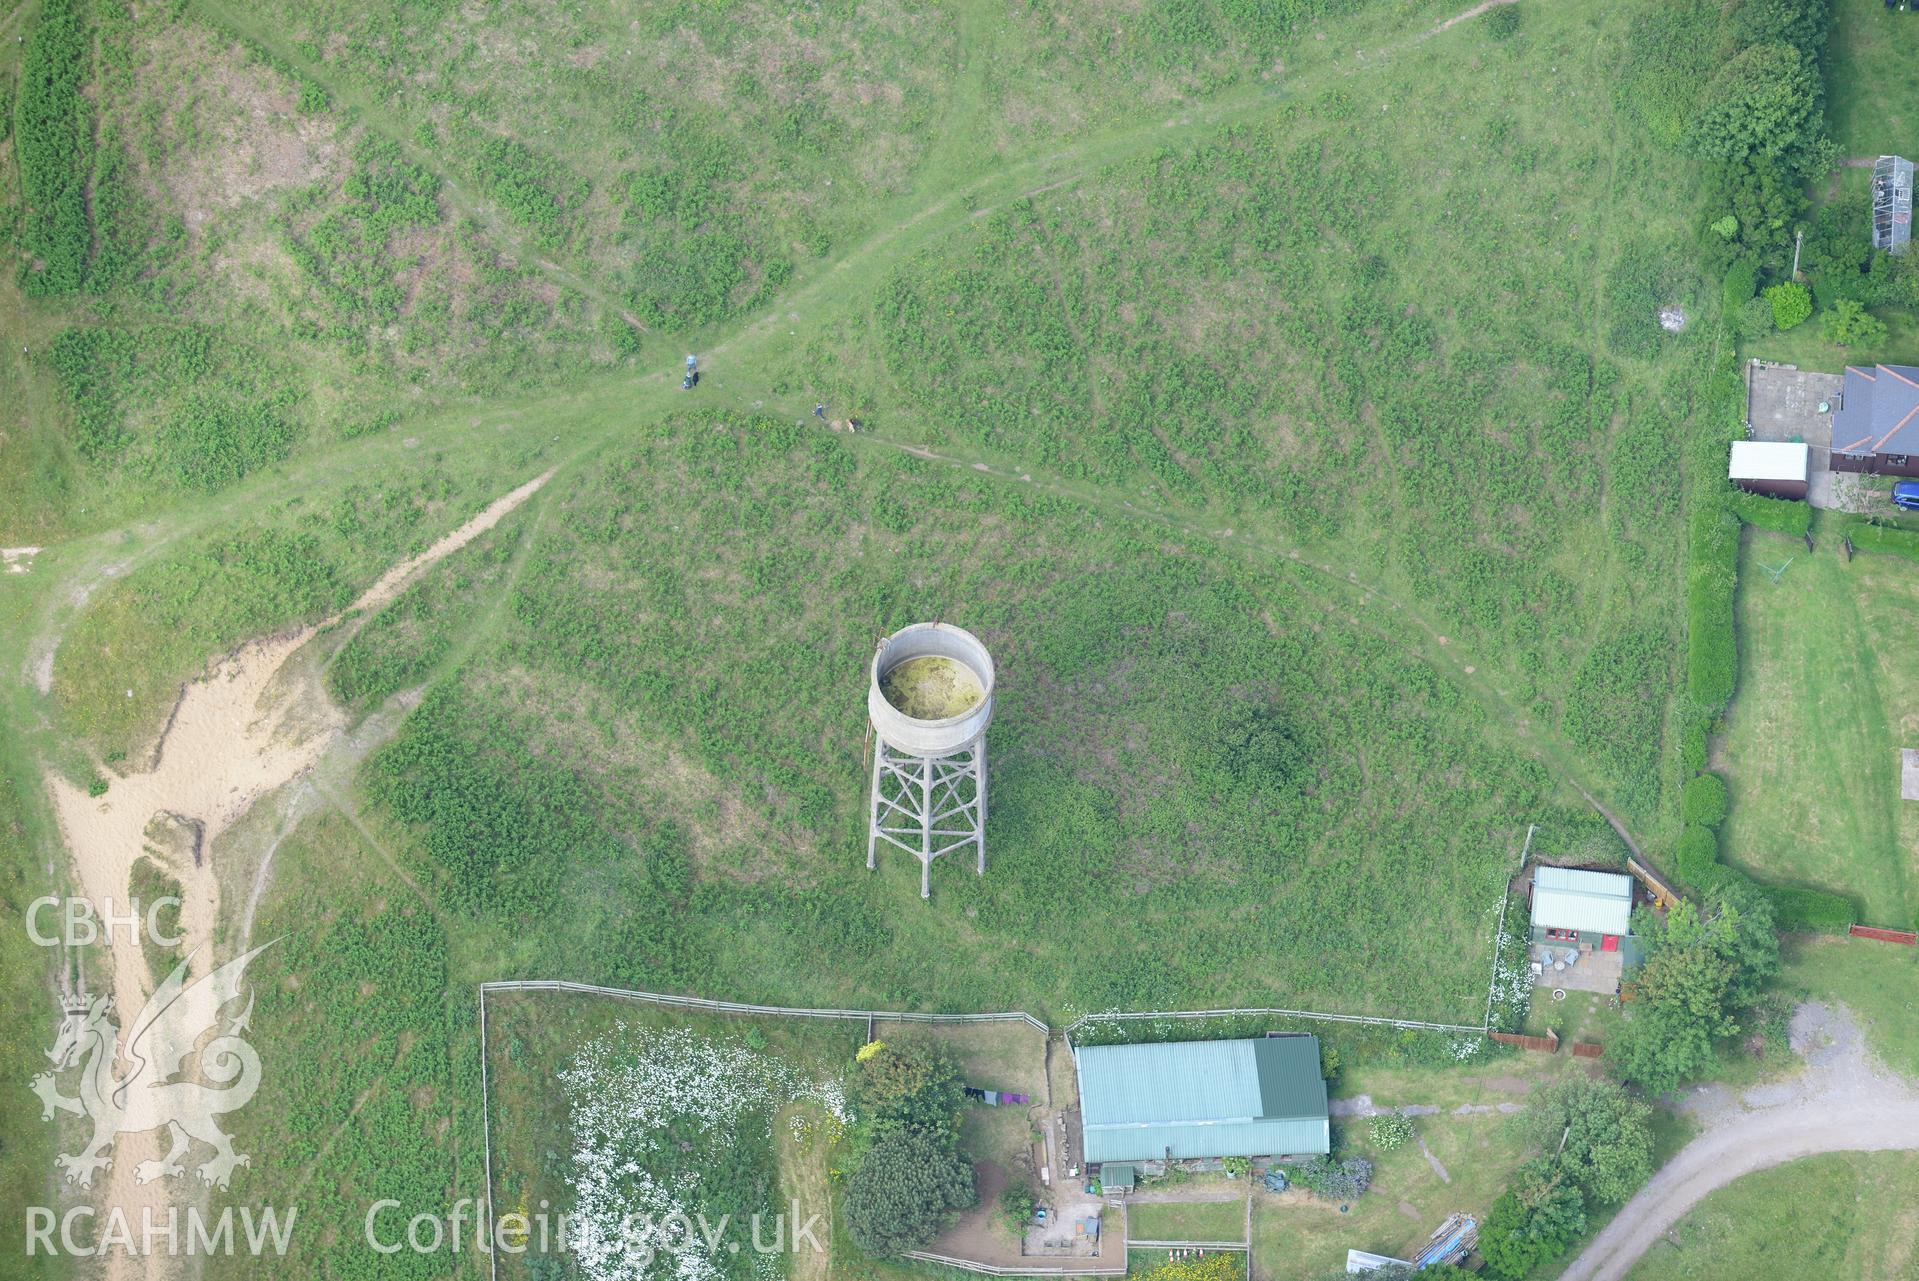 Watertower at Sandy Lane, Parkmill, on the Gower Peninsula. Oblique aerial photograph taken during the Royal Commission's programme of archaeological aerial reconnaissance by Toby Driver on 19th August 2015.